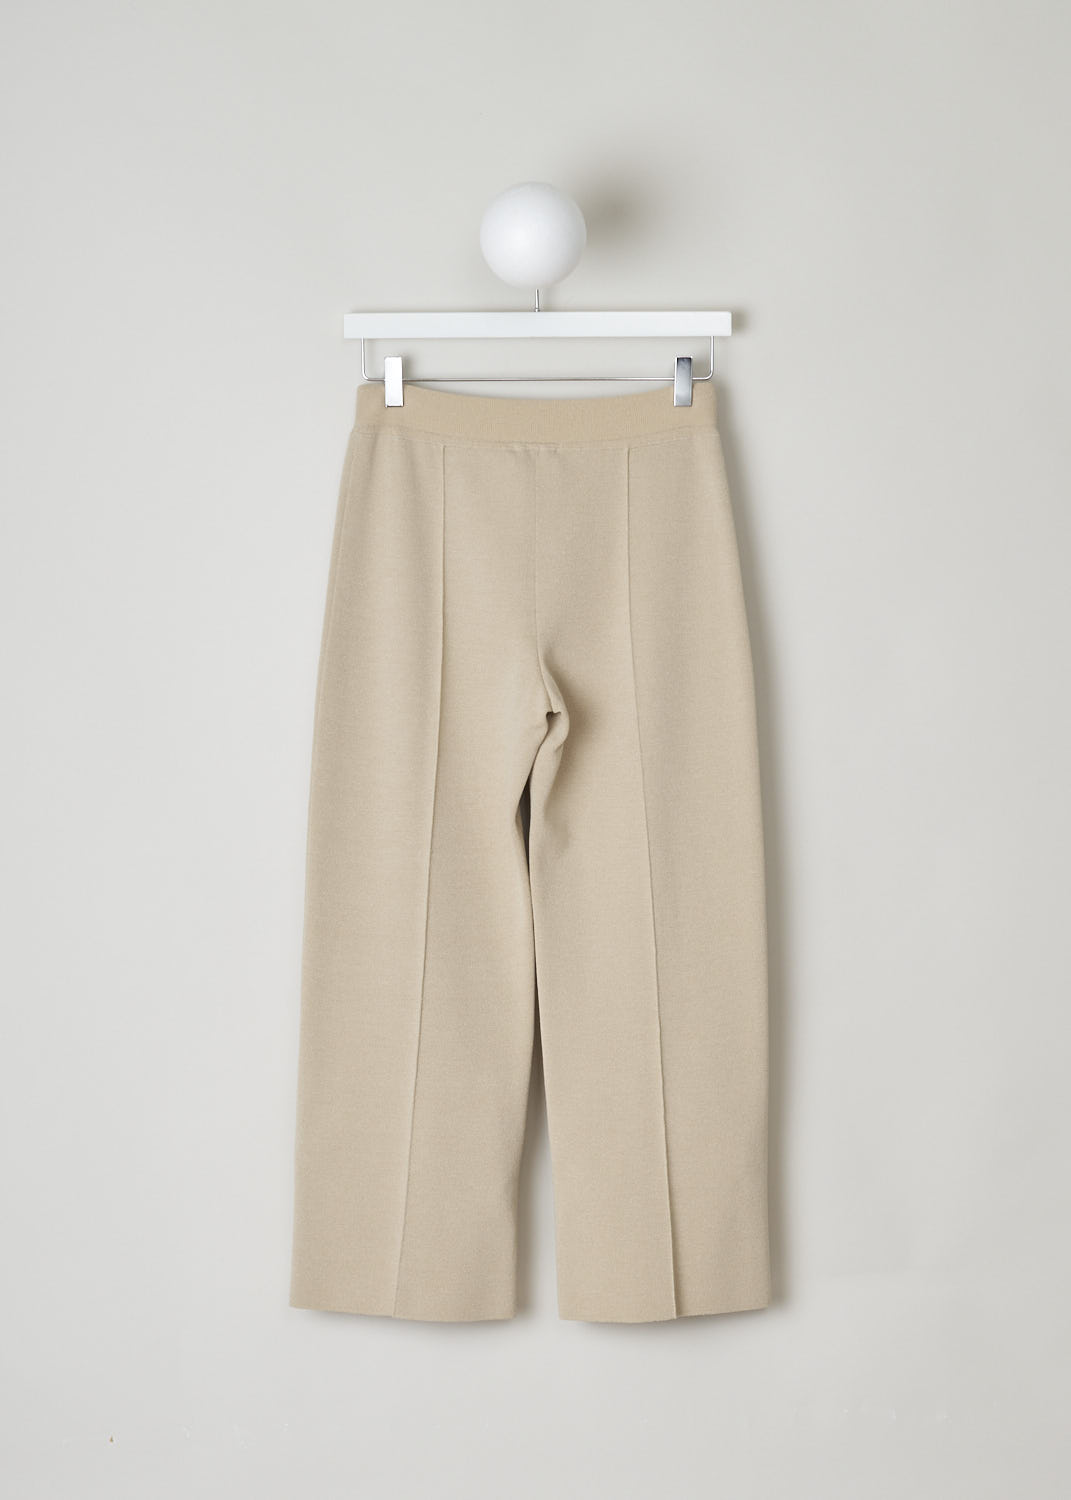 THE ROW, NUDE TAPERED TROUSERS, MARIA_PANT_3374Y205_NUDE, Beige, Back, These nude slip-on trousers feature an elasticated waistline. The trousers are form fitting throughout. Centre seam can be found front and back, creating a paneled look.
